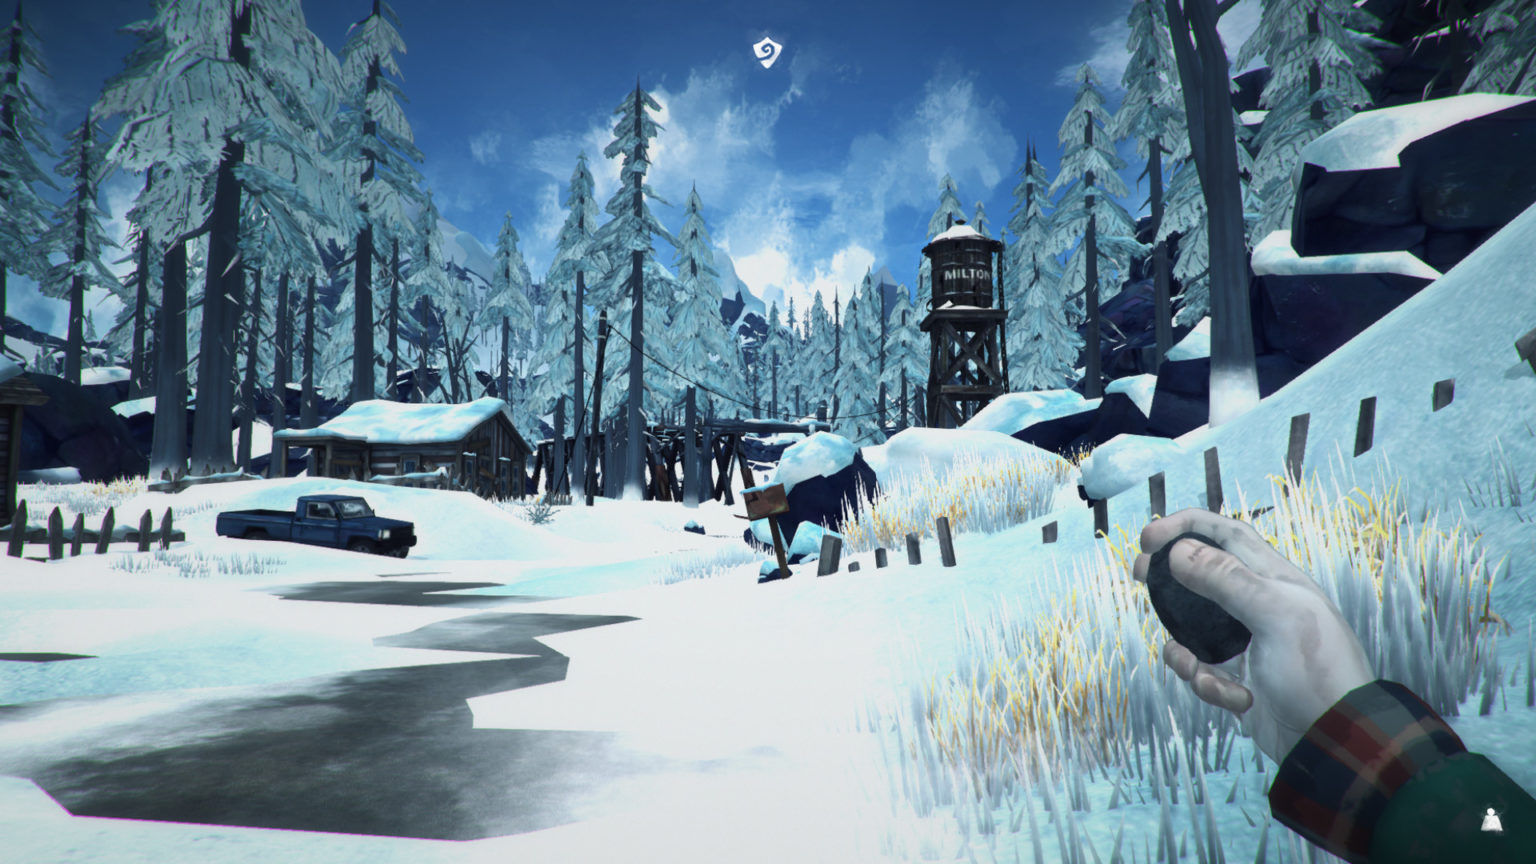 the long dark do pelt conditions decay